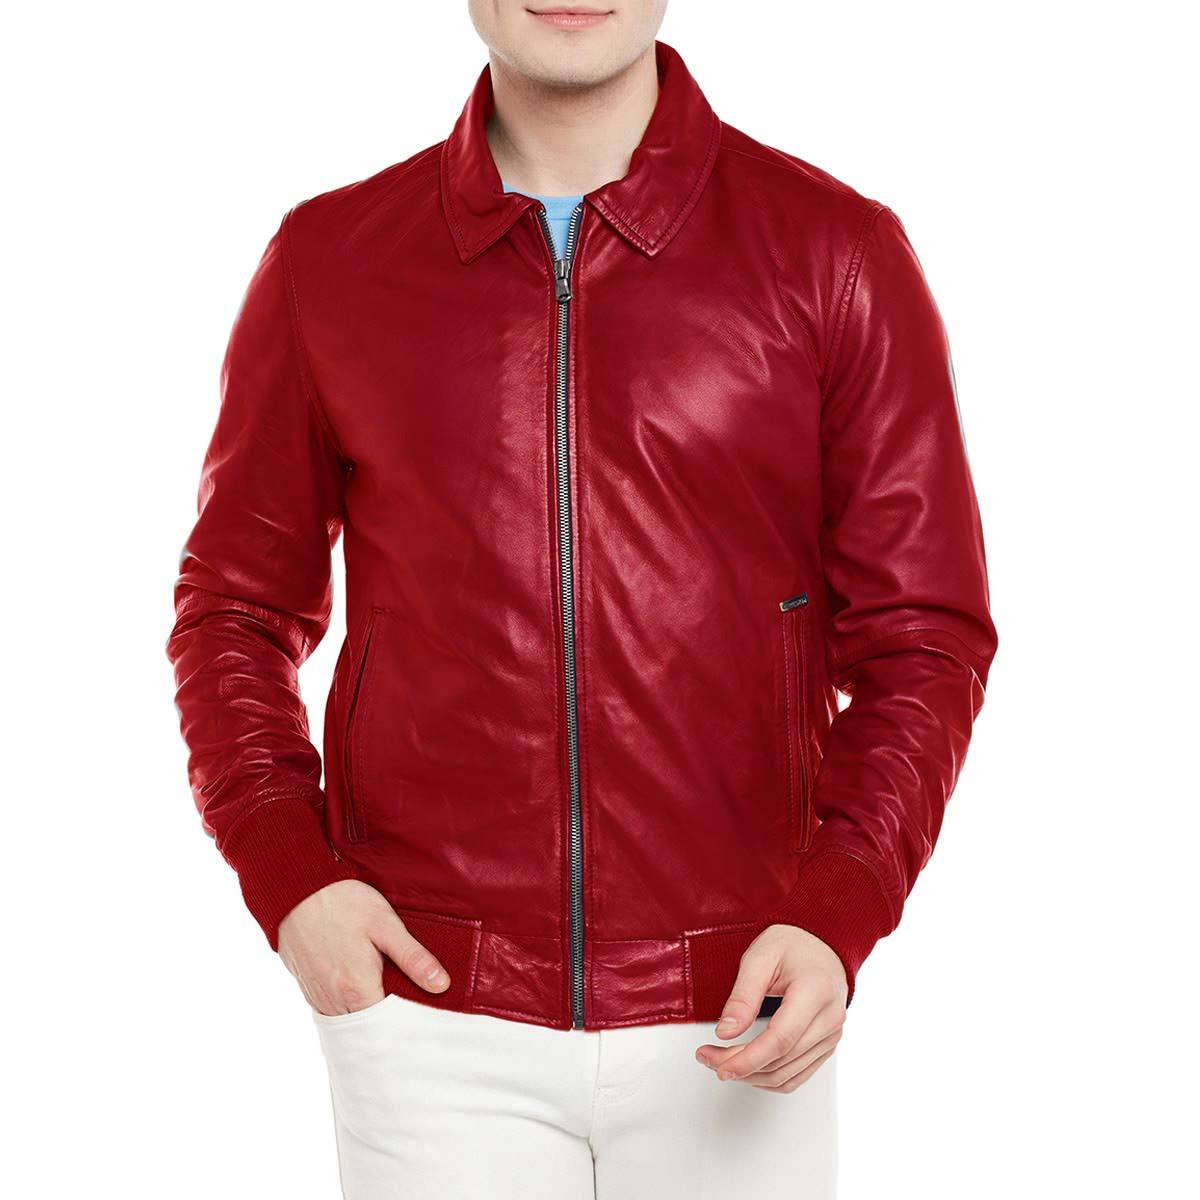 SUPER GLOSSY PURE LEATHER JACKET FOR MEN - Suits & Suit Separates